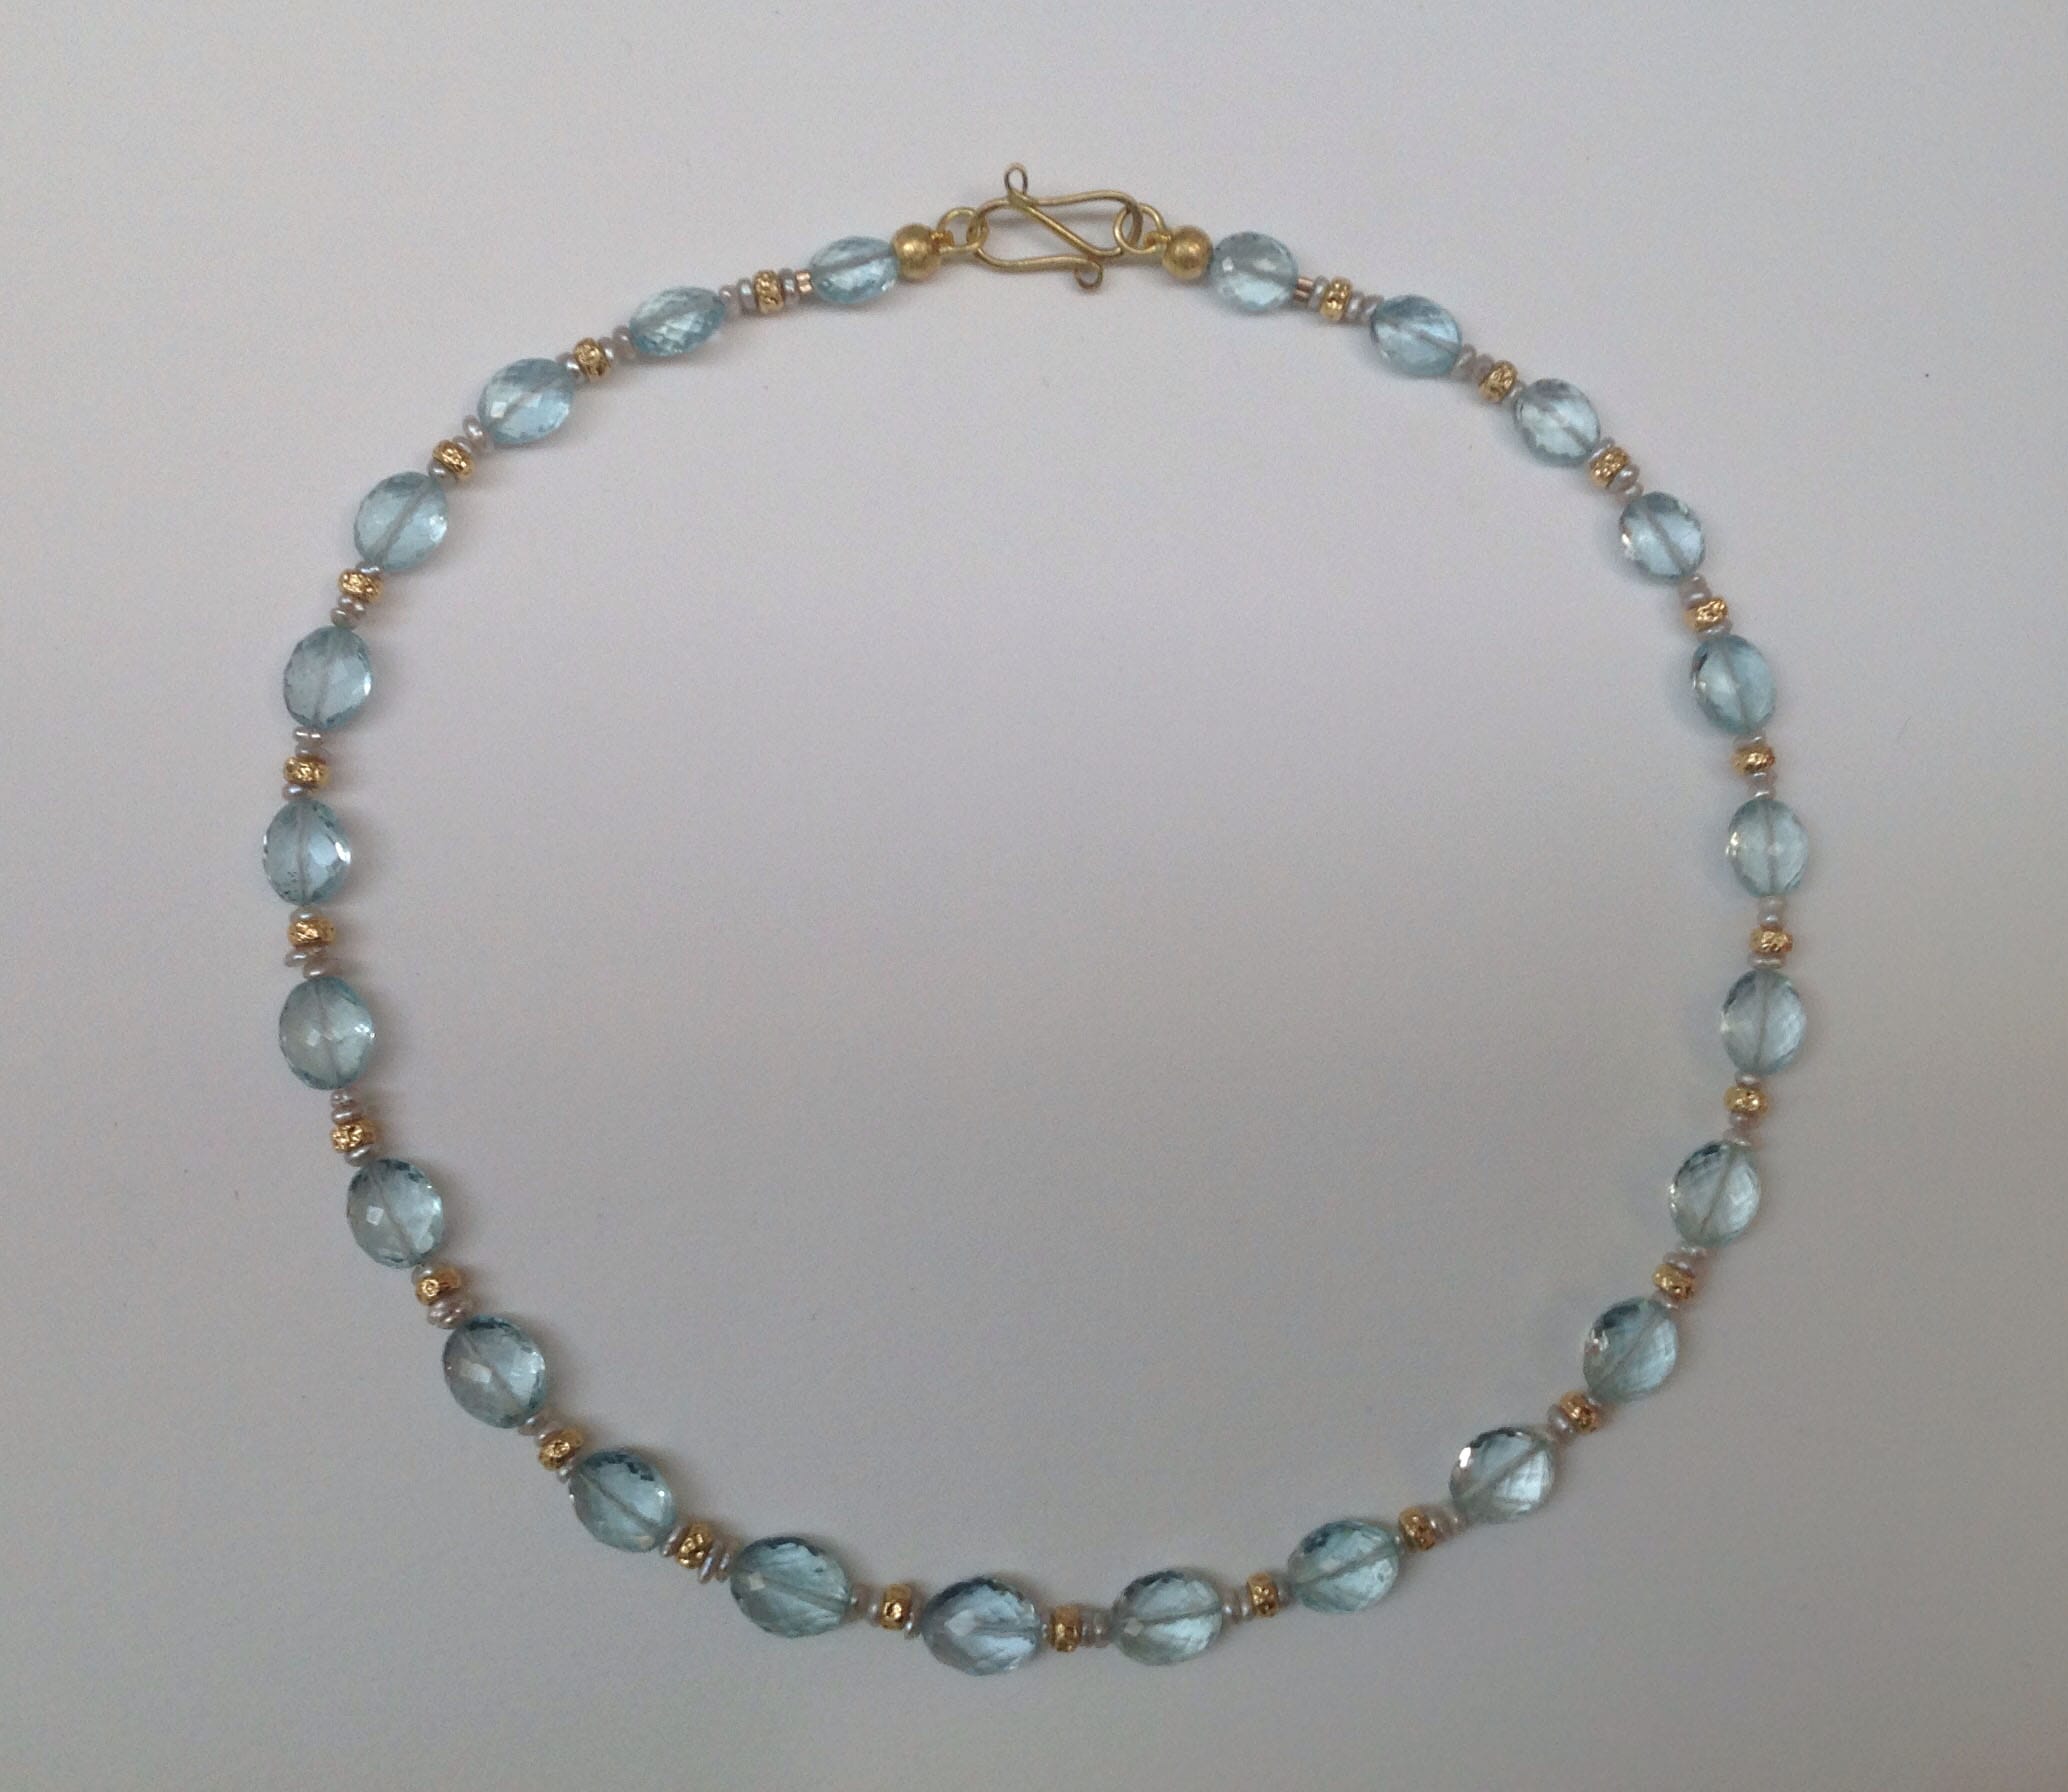 Oval faceted aquamarine beads, 18 carat yellow gold beads and clasp